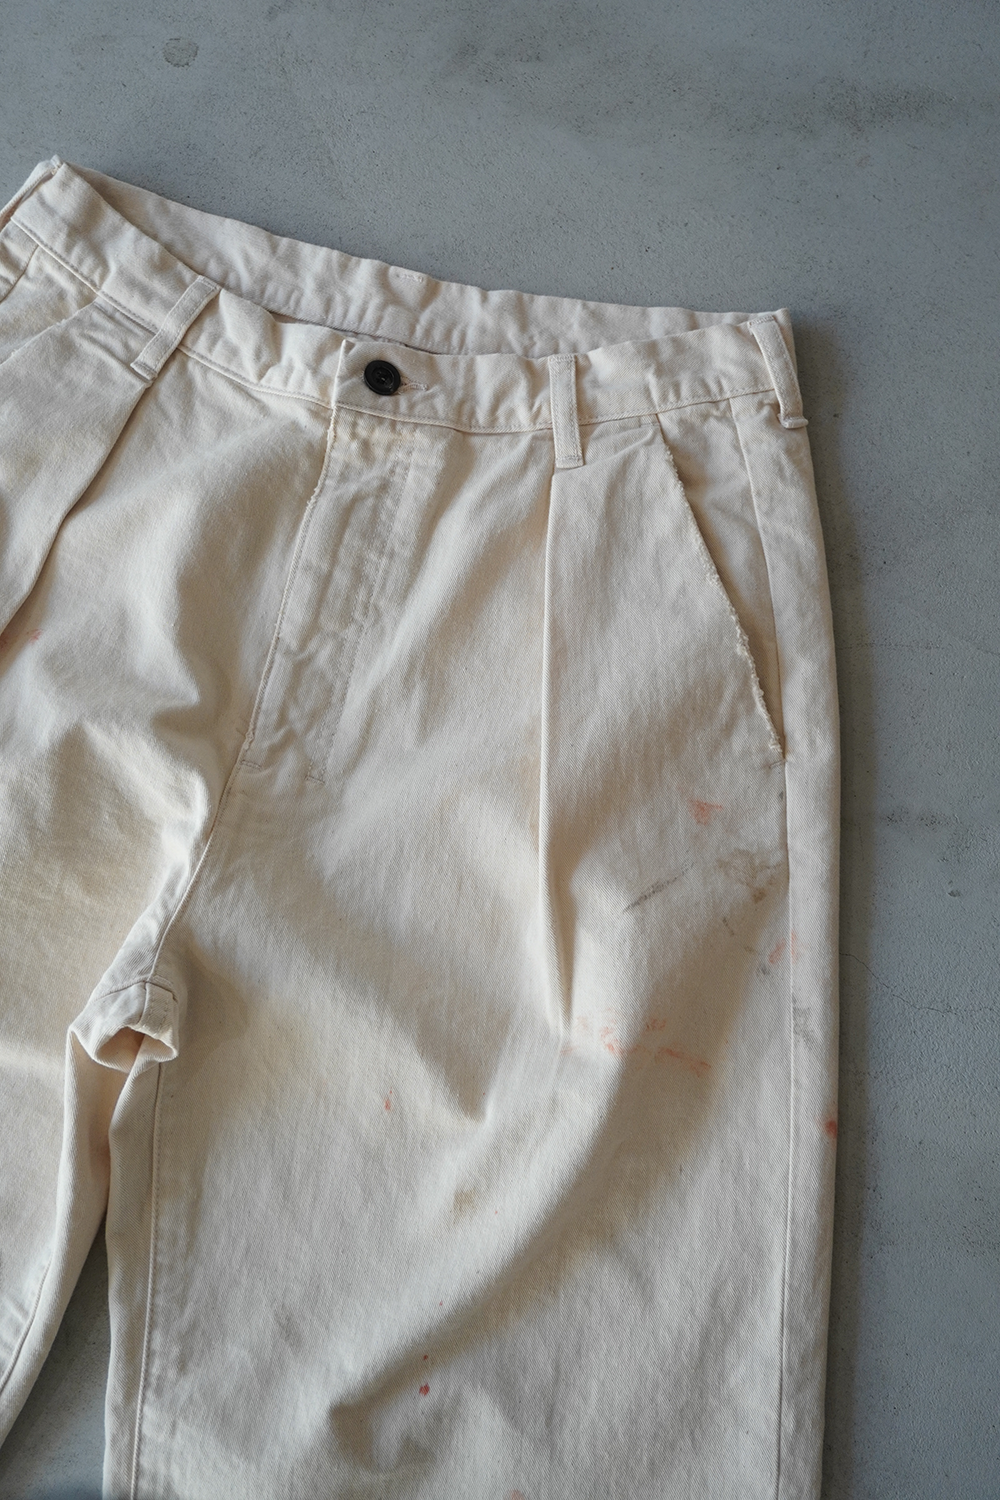 PAINT CHINO TROUSERS(BEIGE)